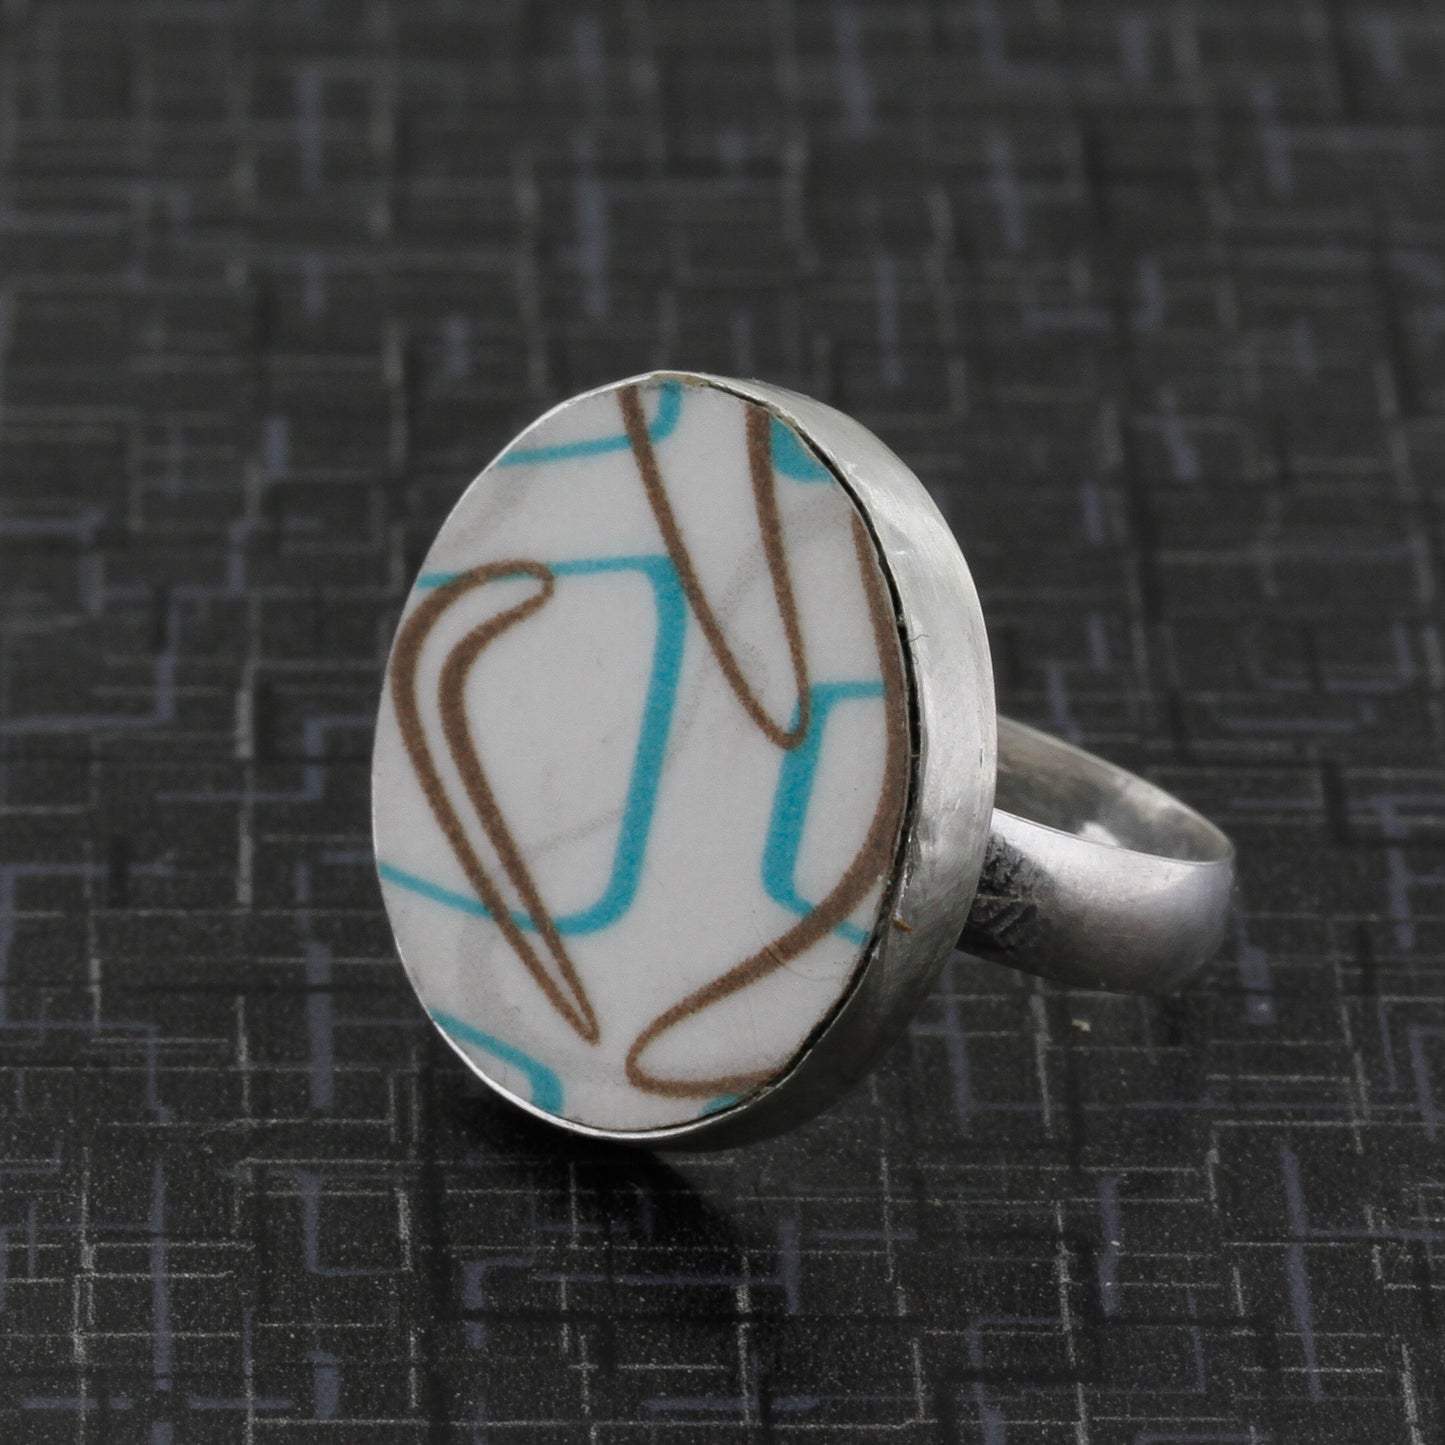 Side view of boomerang laminate ring in turquoise and brown pattern